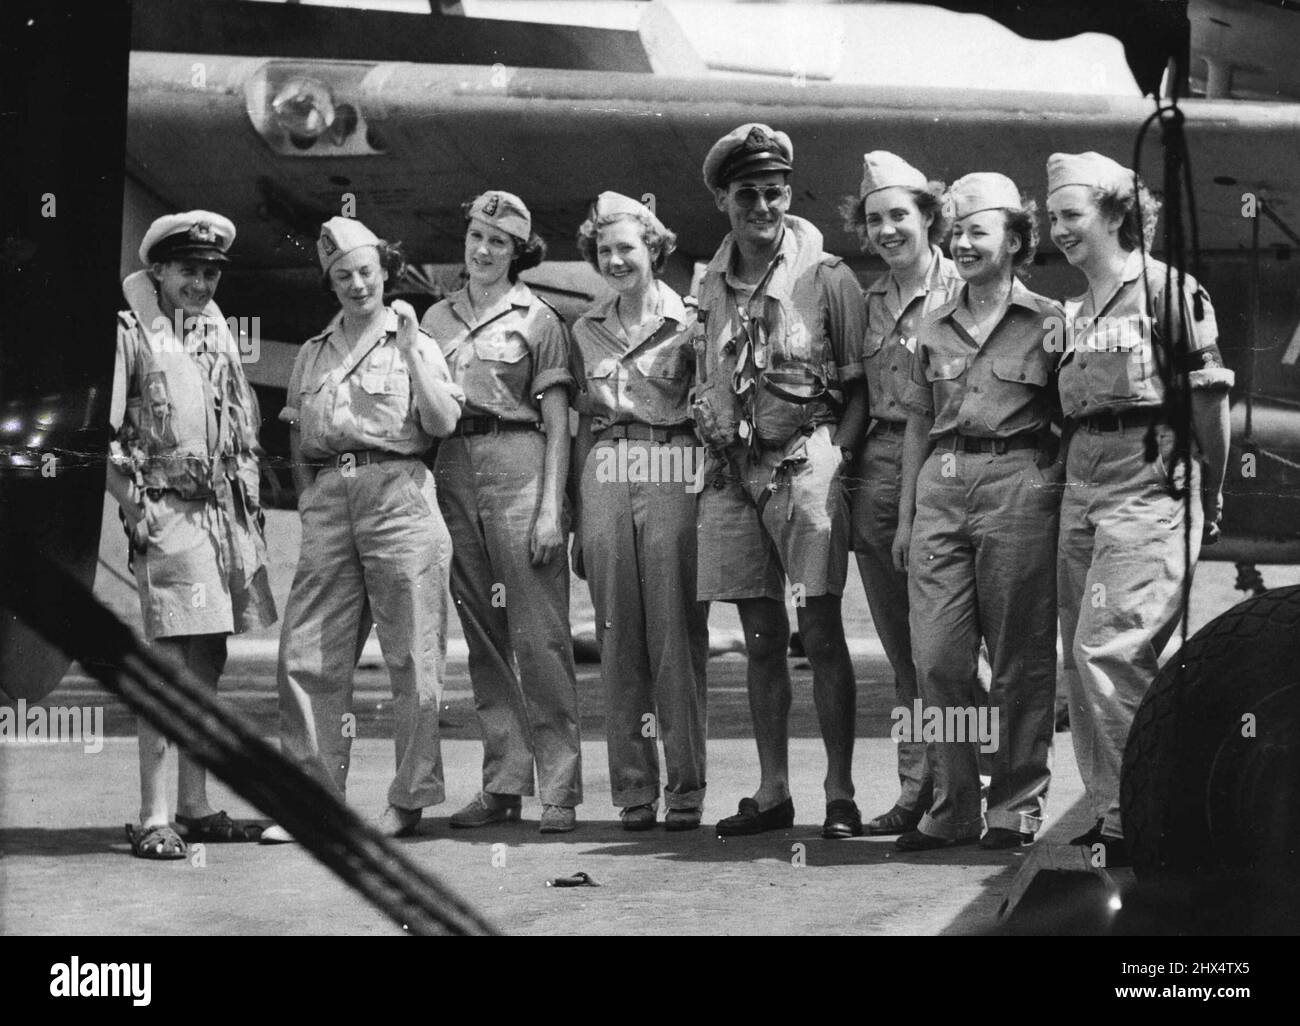 Left to Right: ***** Birmingham, Sister D.C. Irvine, Tasmania, Sister A.M. Hippley, Wells, Sister E. Surtees, York, Sub.Lt. (A) Hodgson, Oxshott, Surrey, Nurse J. Pardoe, Tenbury, Worcs., Nurse M. McIntyre, Dumbartonshire, Nurse J. Walker, Banstead, Surrey. The ***** members of Q.A.N.S. (Naval Div.) who took passage in HMS Vengeance form Leyte to Hong Kong for nursing duties in the ***** Colony, are seen photographed against one of the aircraft on the flight-deck. September 28, 1945. (Photo by Royal Naval Official Photograph). Stock Photo